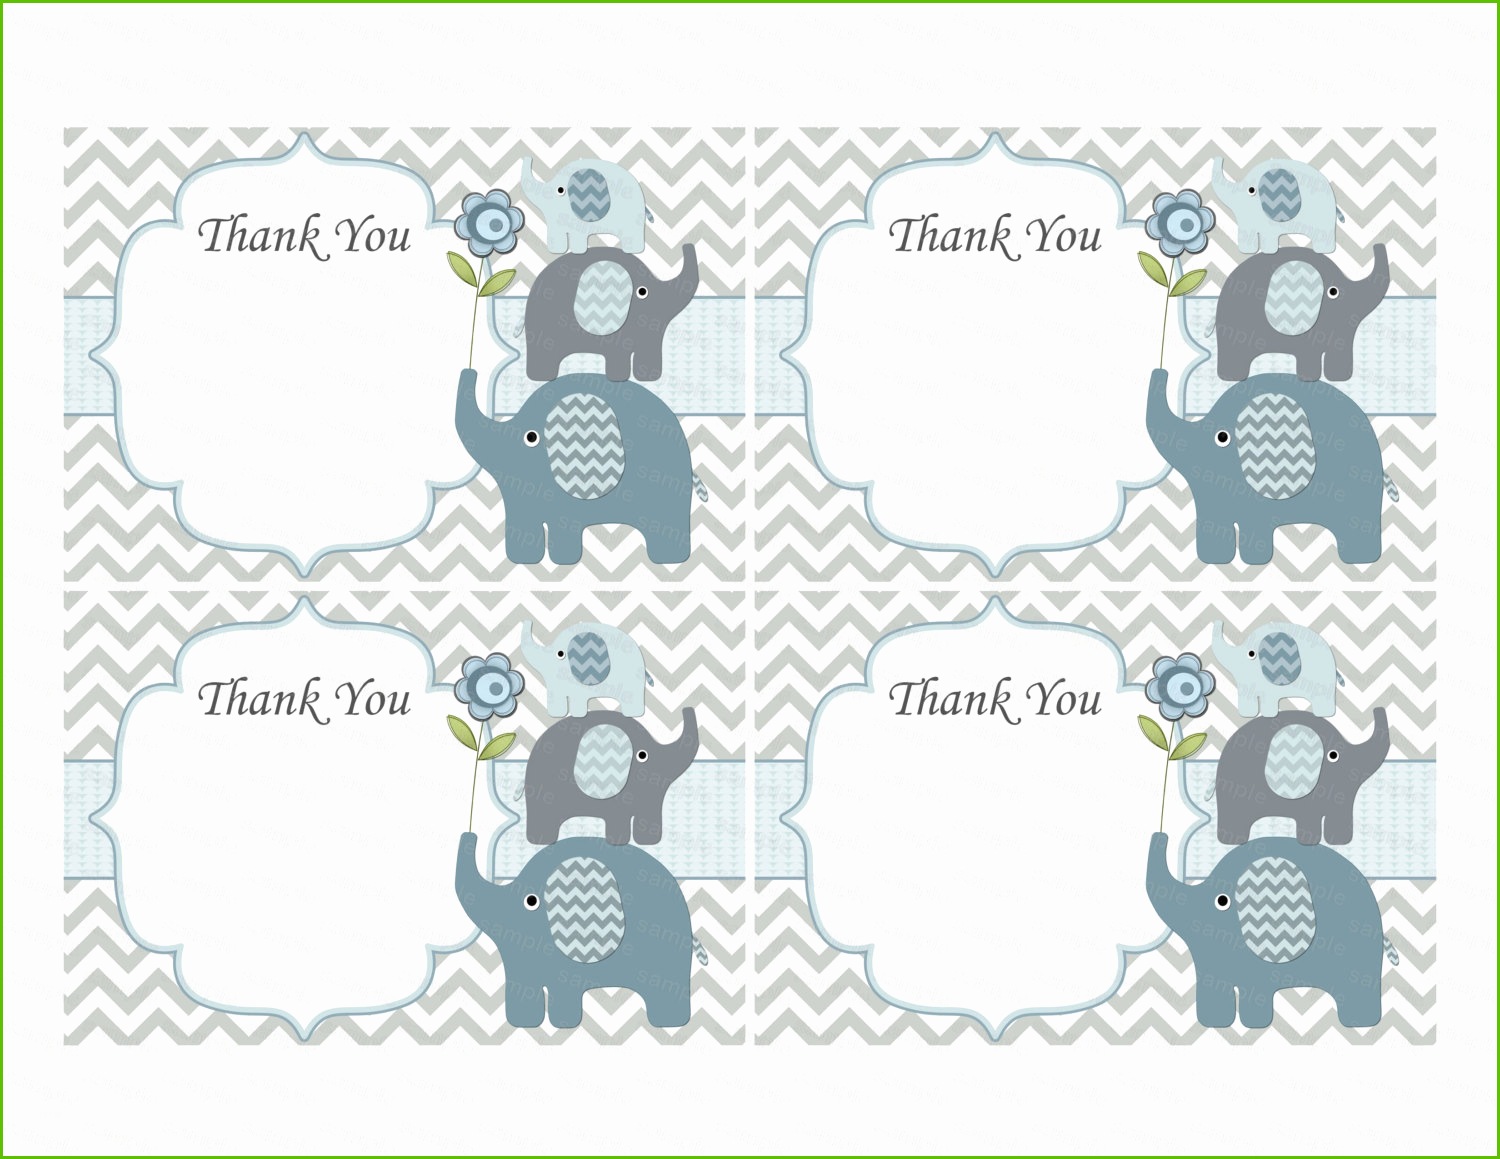 Full Size of Baby Shower:72+ Rousing Baby Shower Thank You Cards Picture Ideas Bebe Baby Shower With Baby Shower Party Plus My Baby Shower Together With Cosas De Baby Shower As Well As A Baby Shower